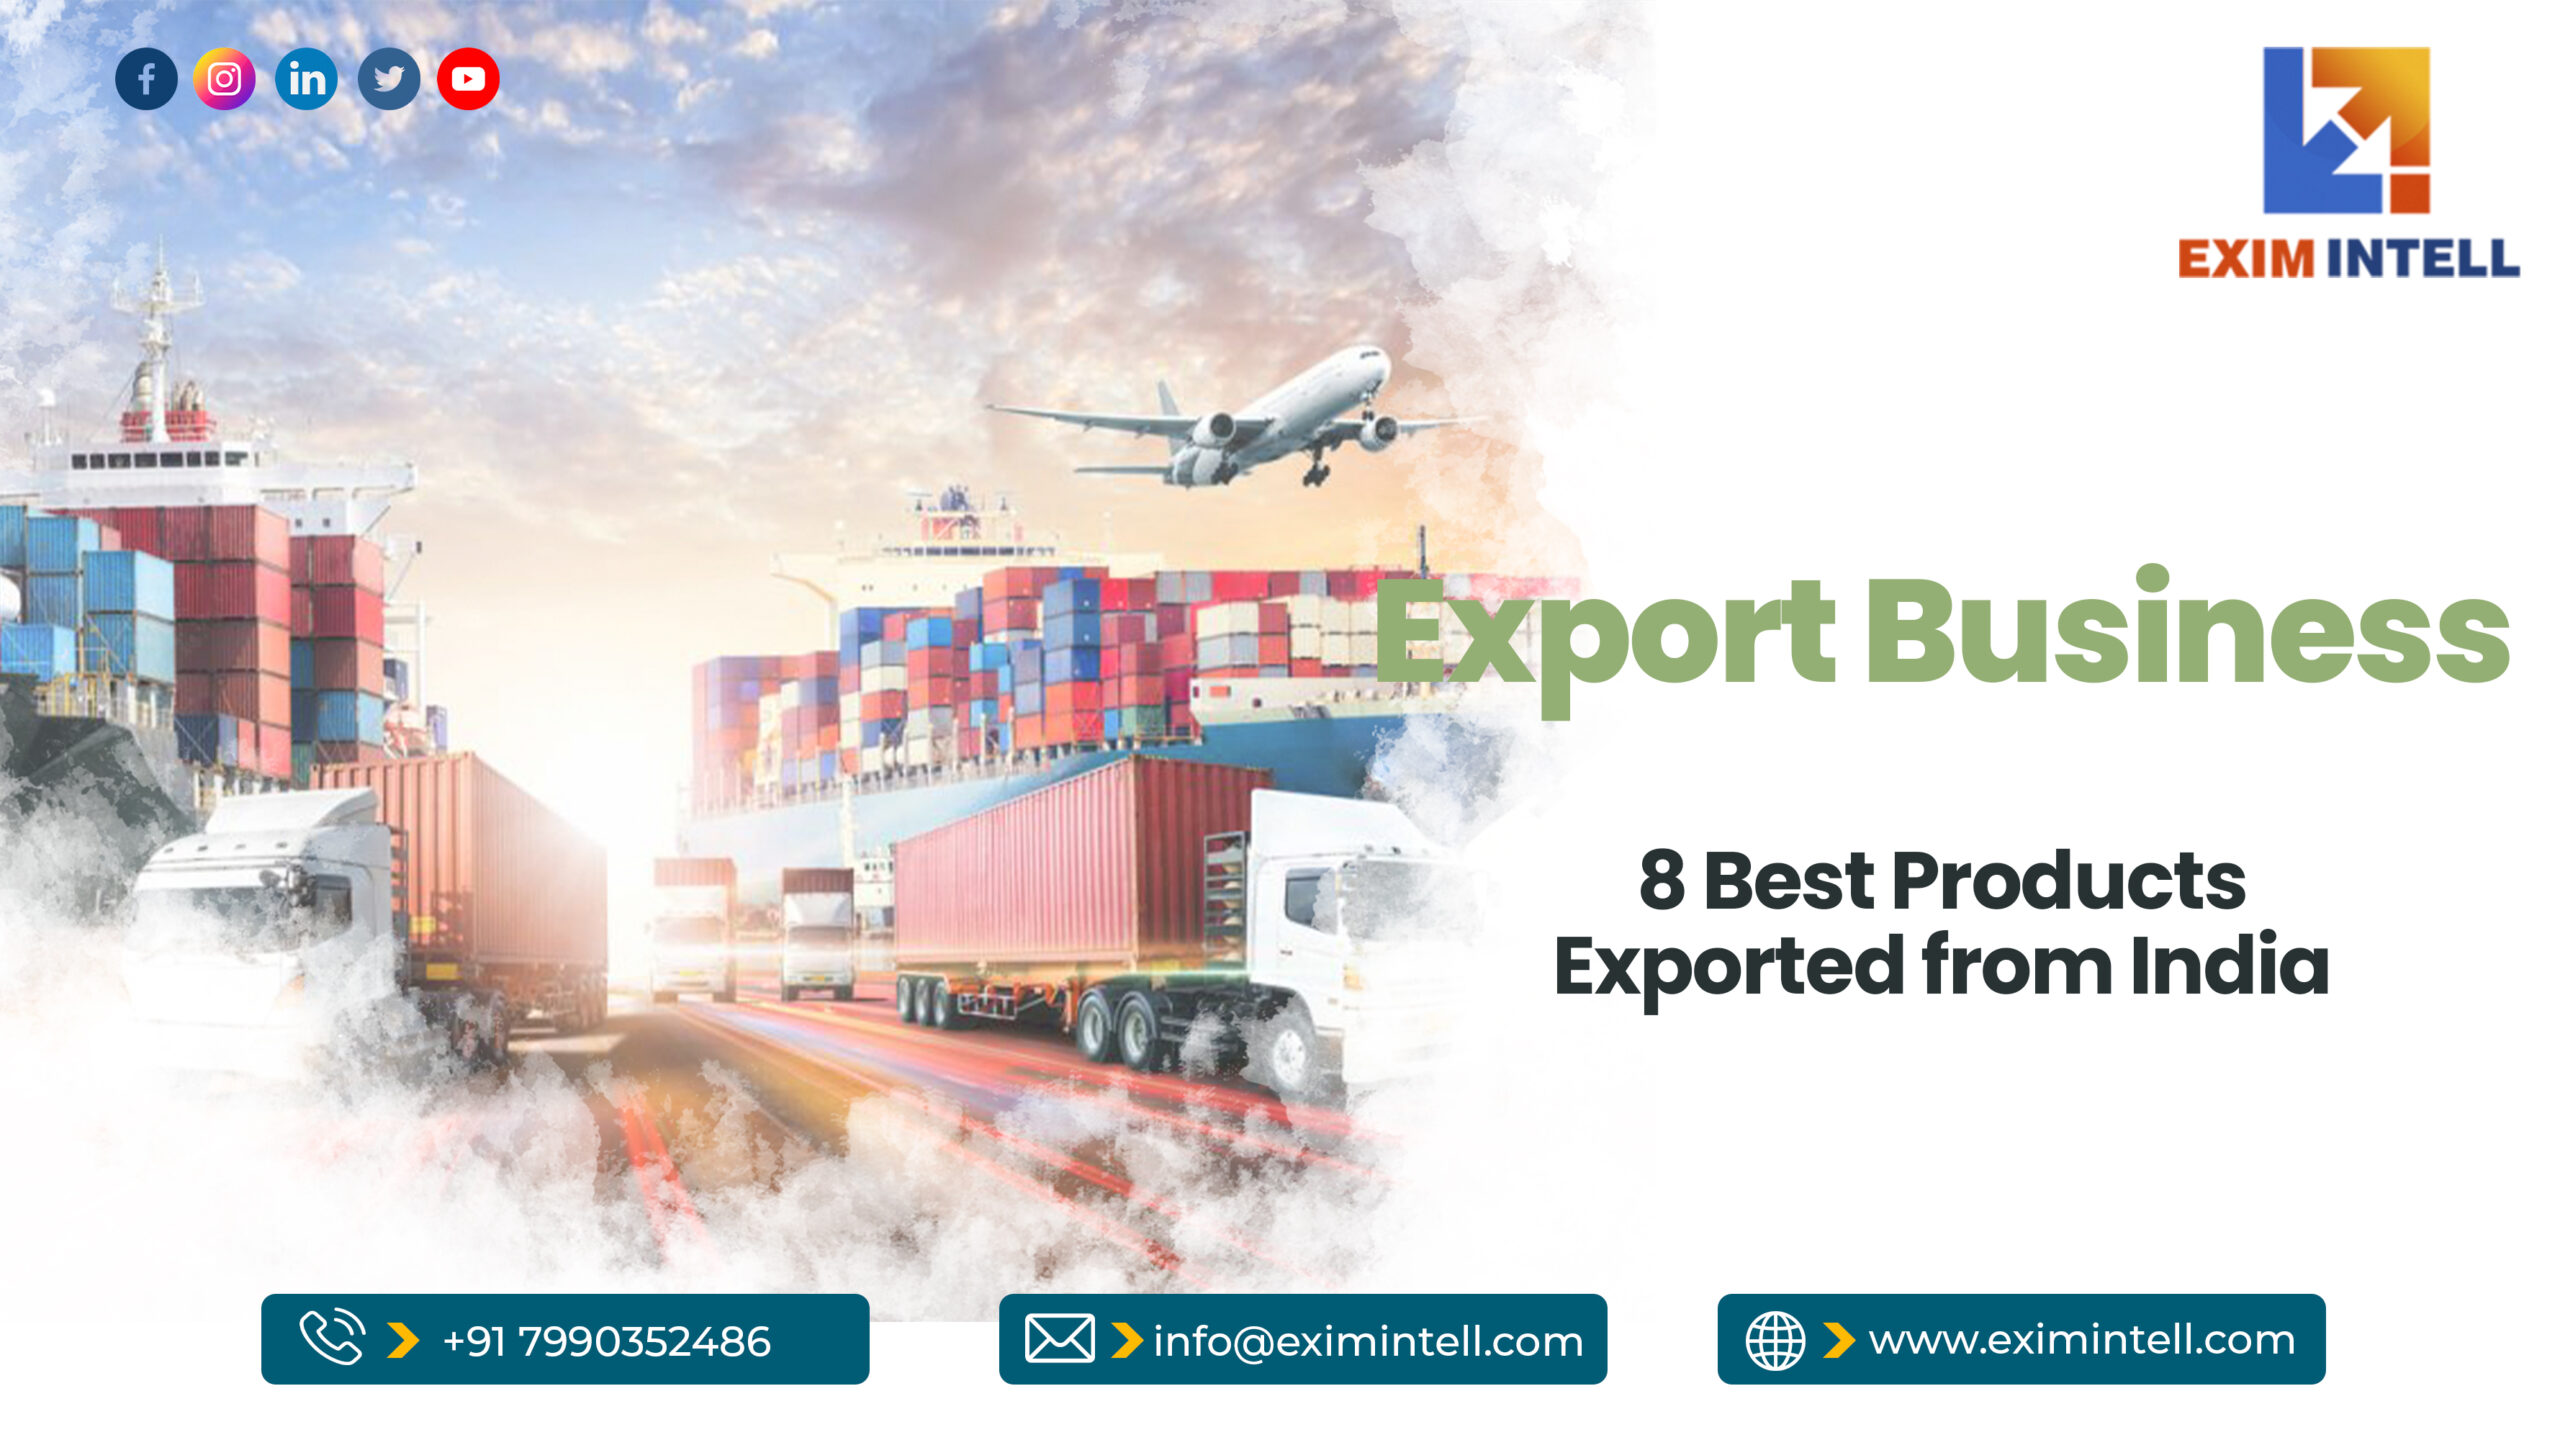 Export Business – 8 Best Products exported from India